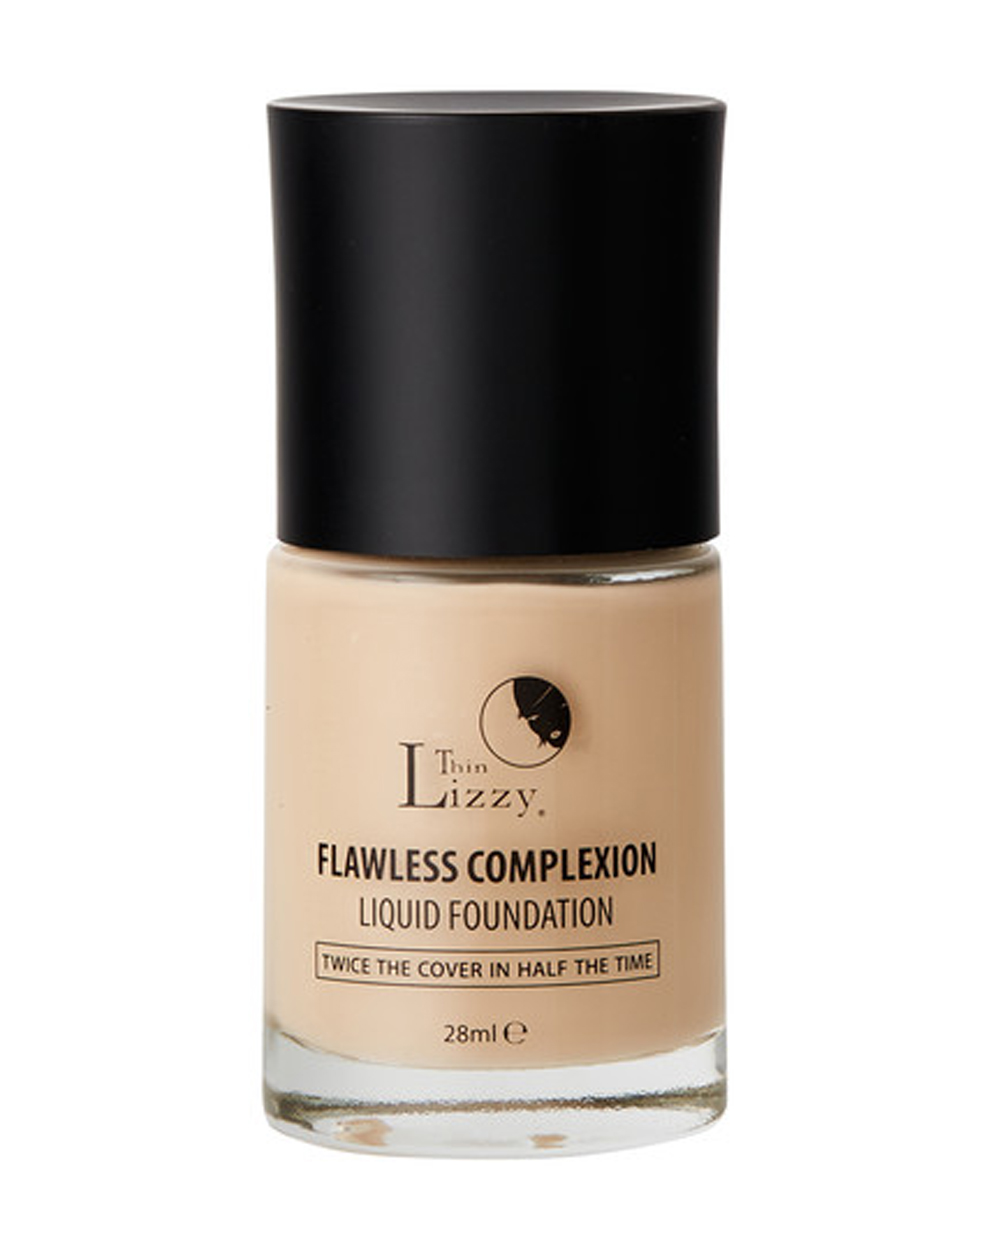 Best foundation for hiding scars Thin Lizzy Flawless Complexion Liquid Foundation